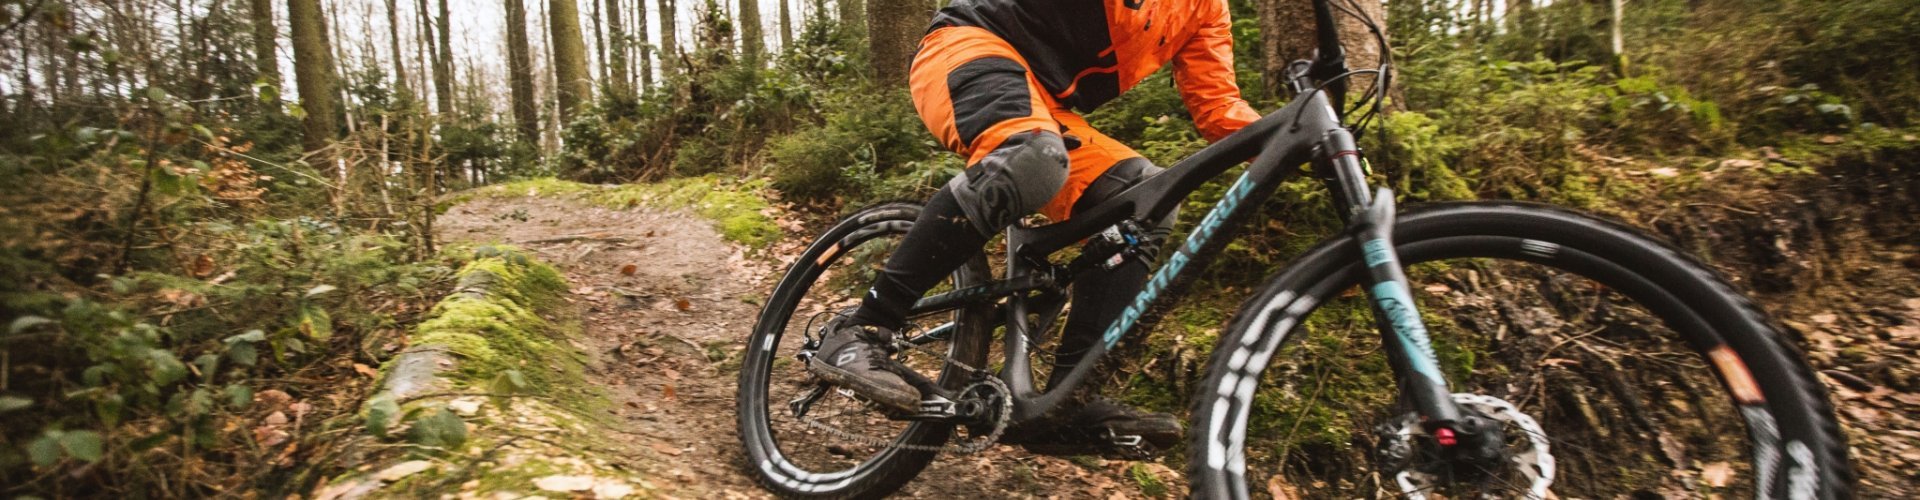 Riding e*thirteen's TRS Race and TRS Plus tyres on Enduro trails.